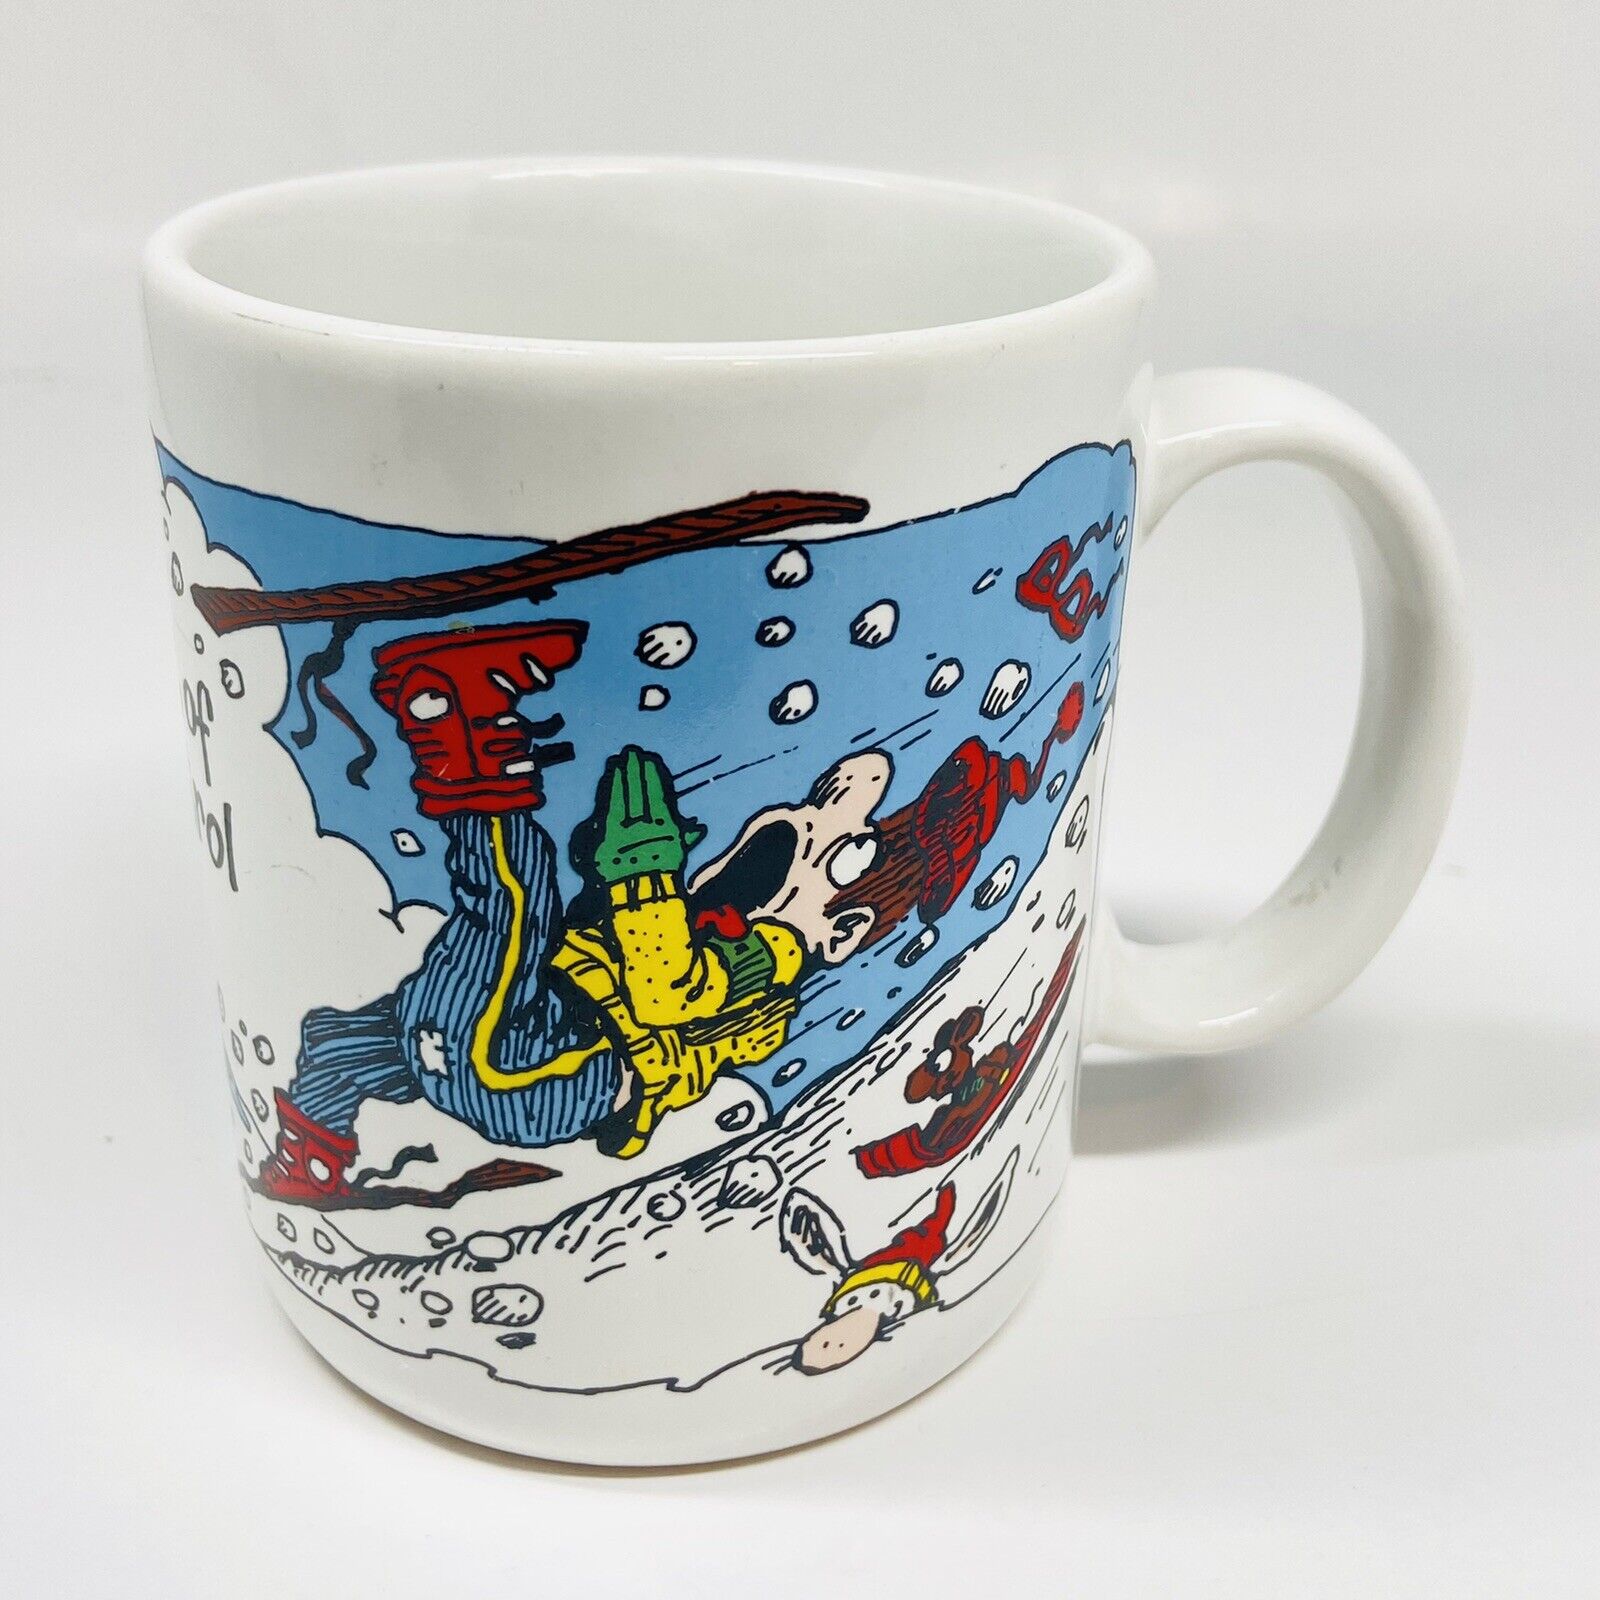 VTG Coffee Mug 12 oz Gary Patterson Out of Control Japan Ski By Thought Factory 